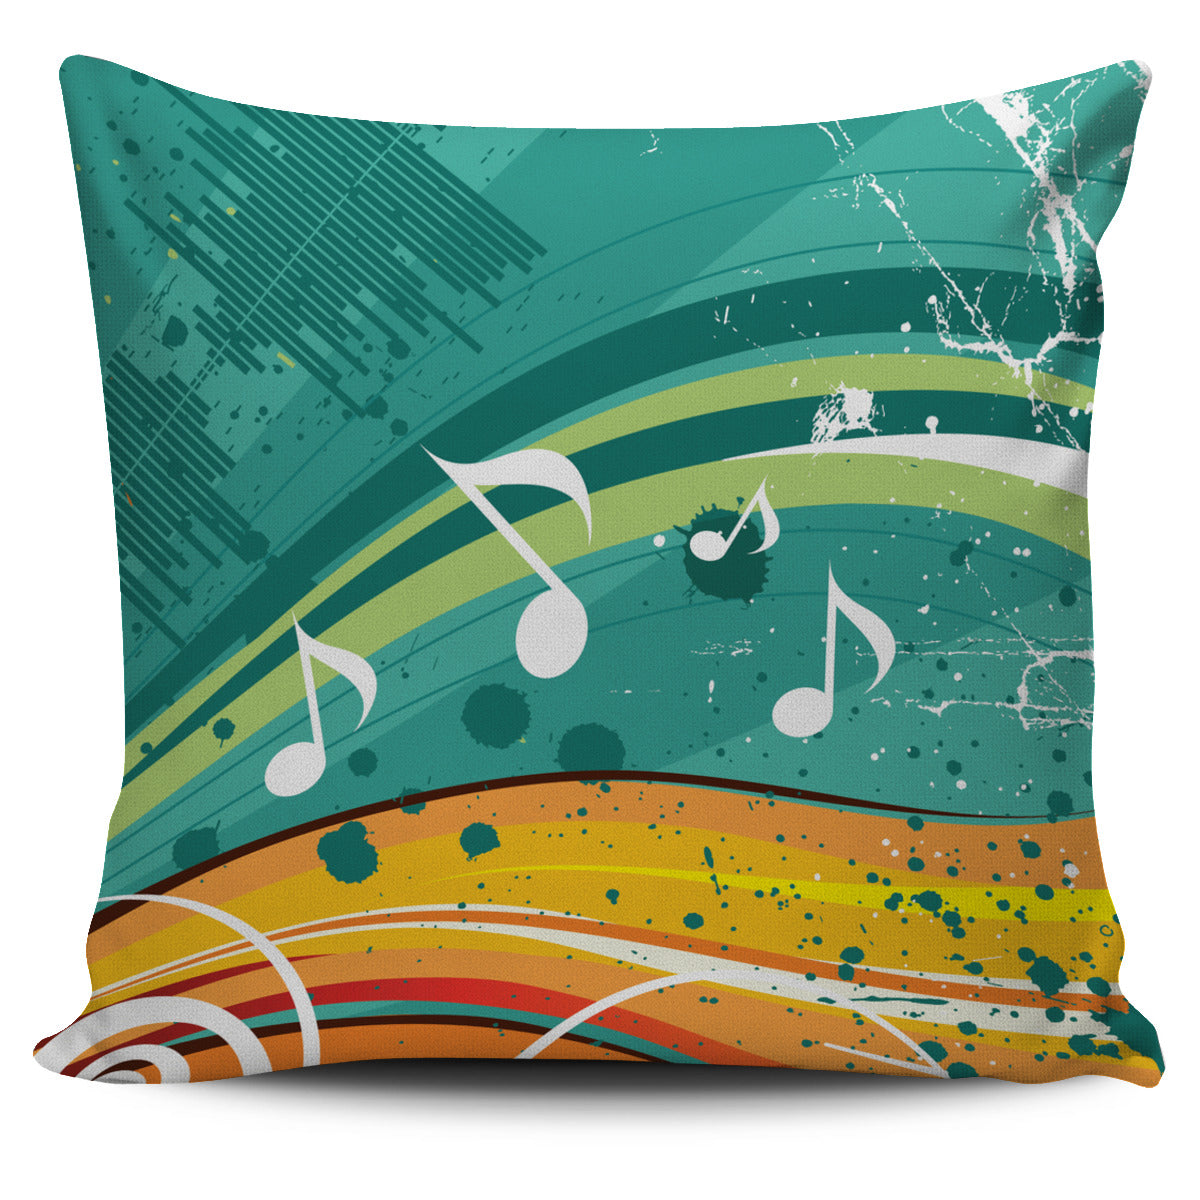 Funky Music Pillow Cover